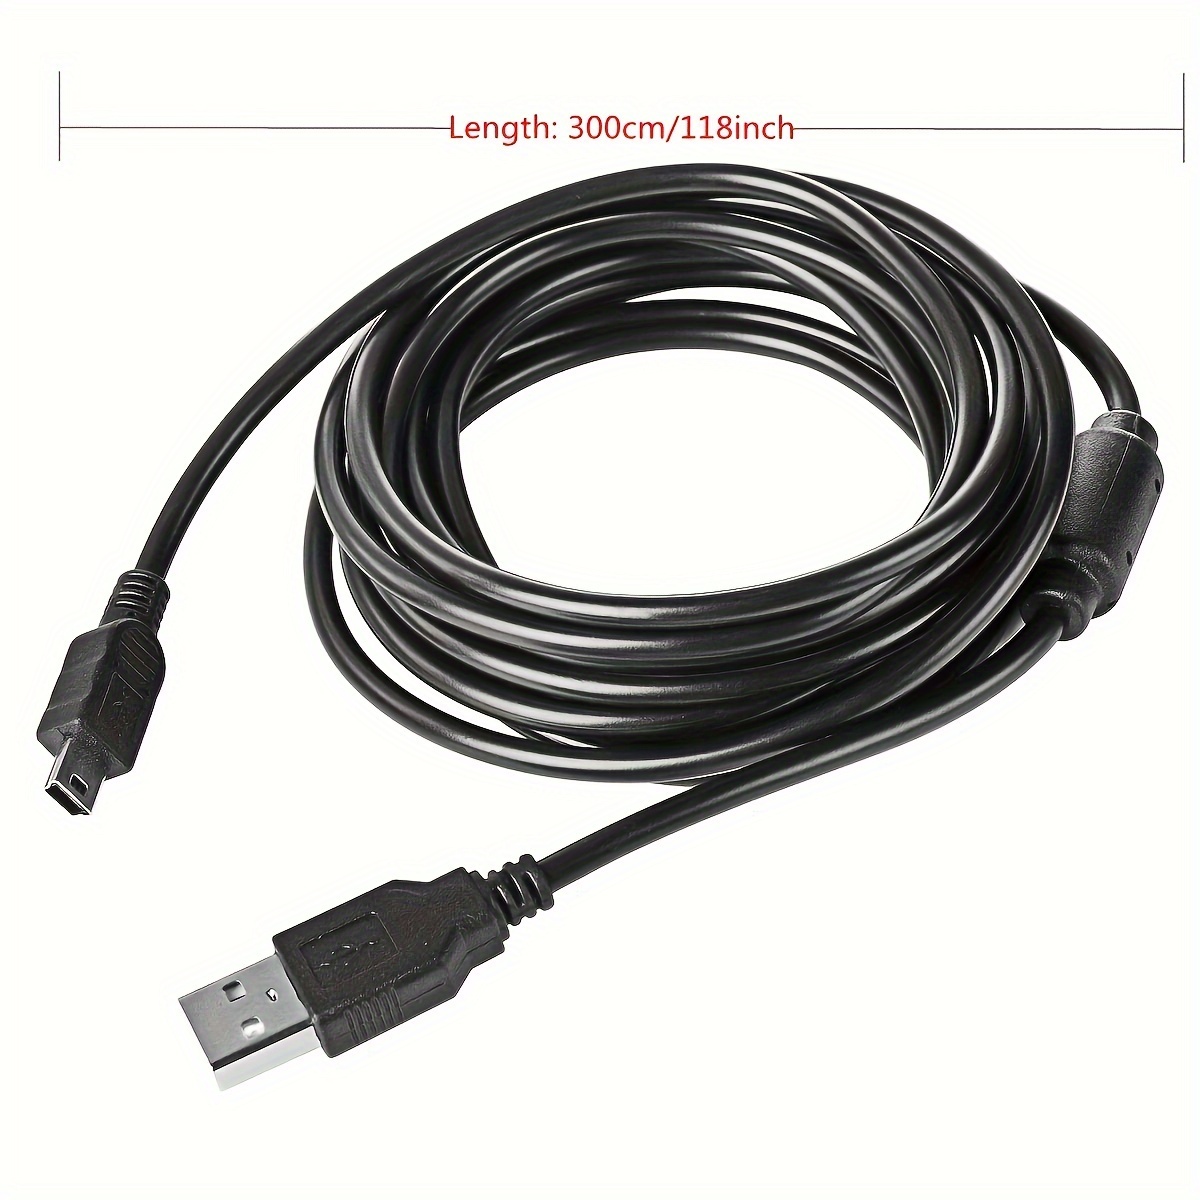 Camera USB 2.0 Cable Miniusb Charging Mini B Cord Perfect for 808 Bluetooth  Speaker Charger PS3 Controller GoPro Garmin Edge 500 Ti84 Plus CE External